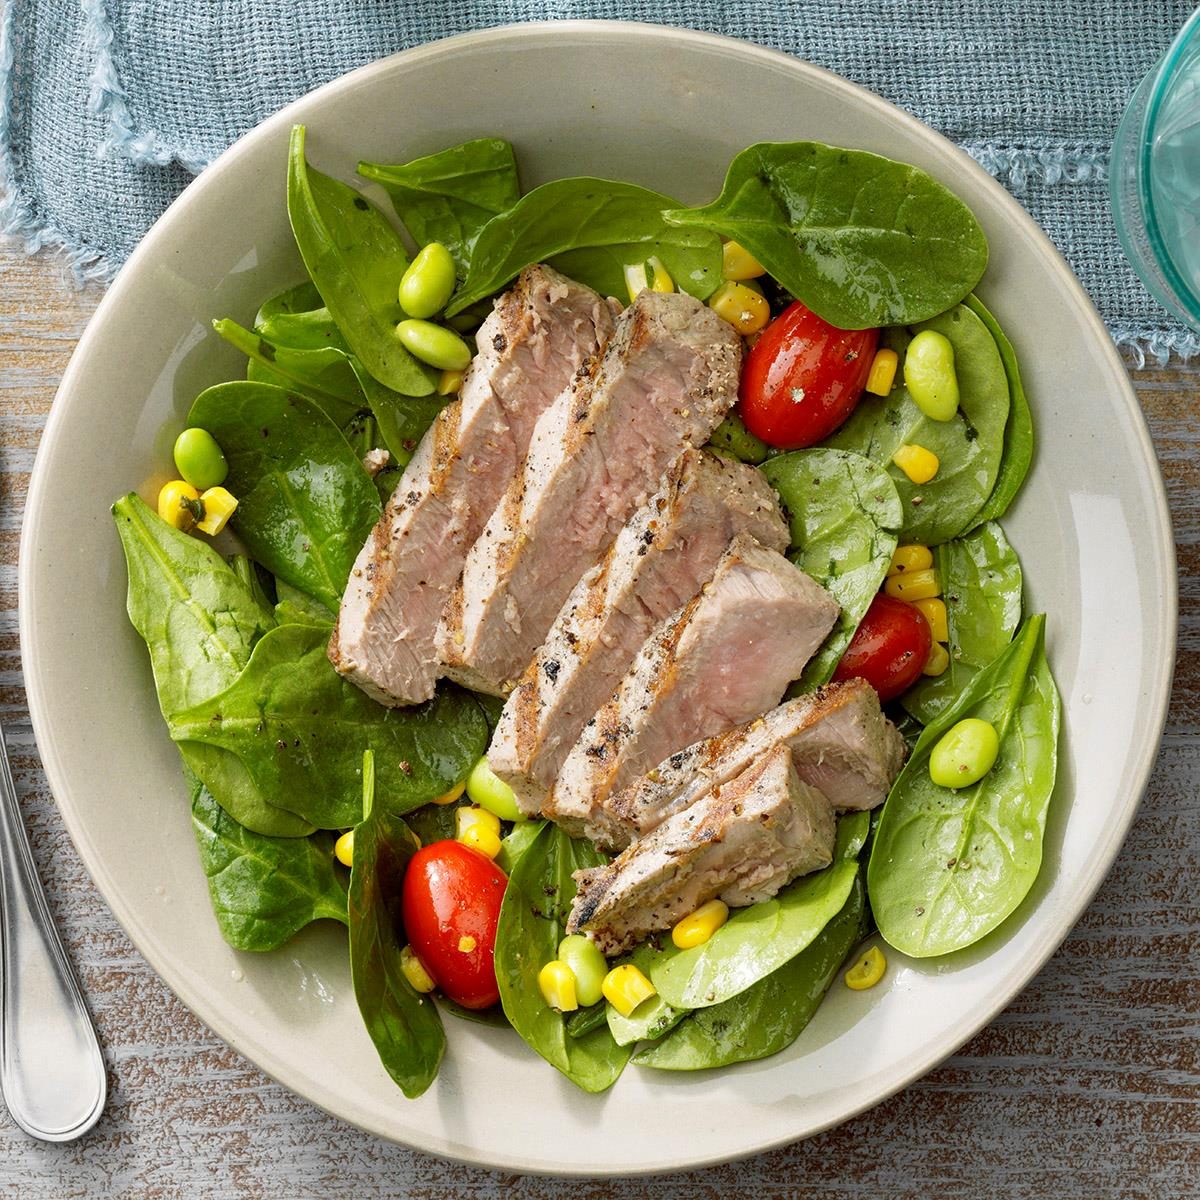 Grilled Tuna Salad Recipe: How to Make It